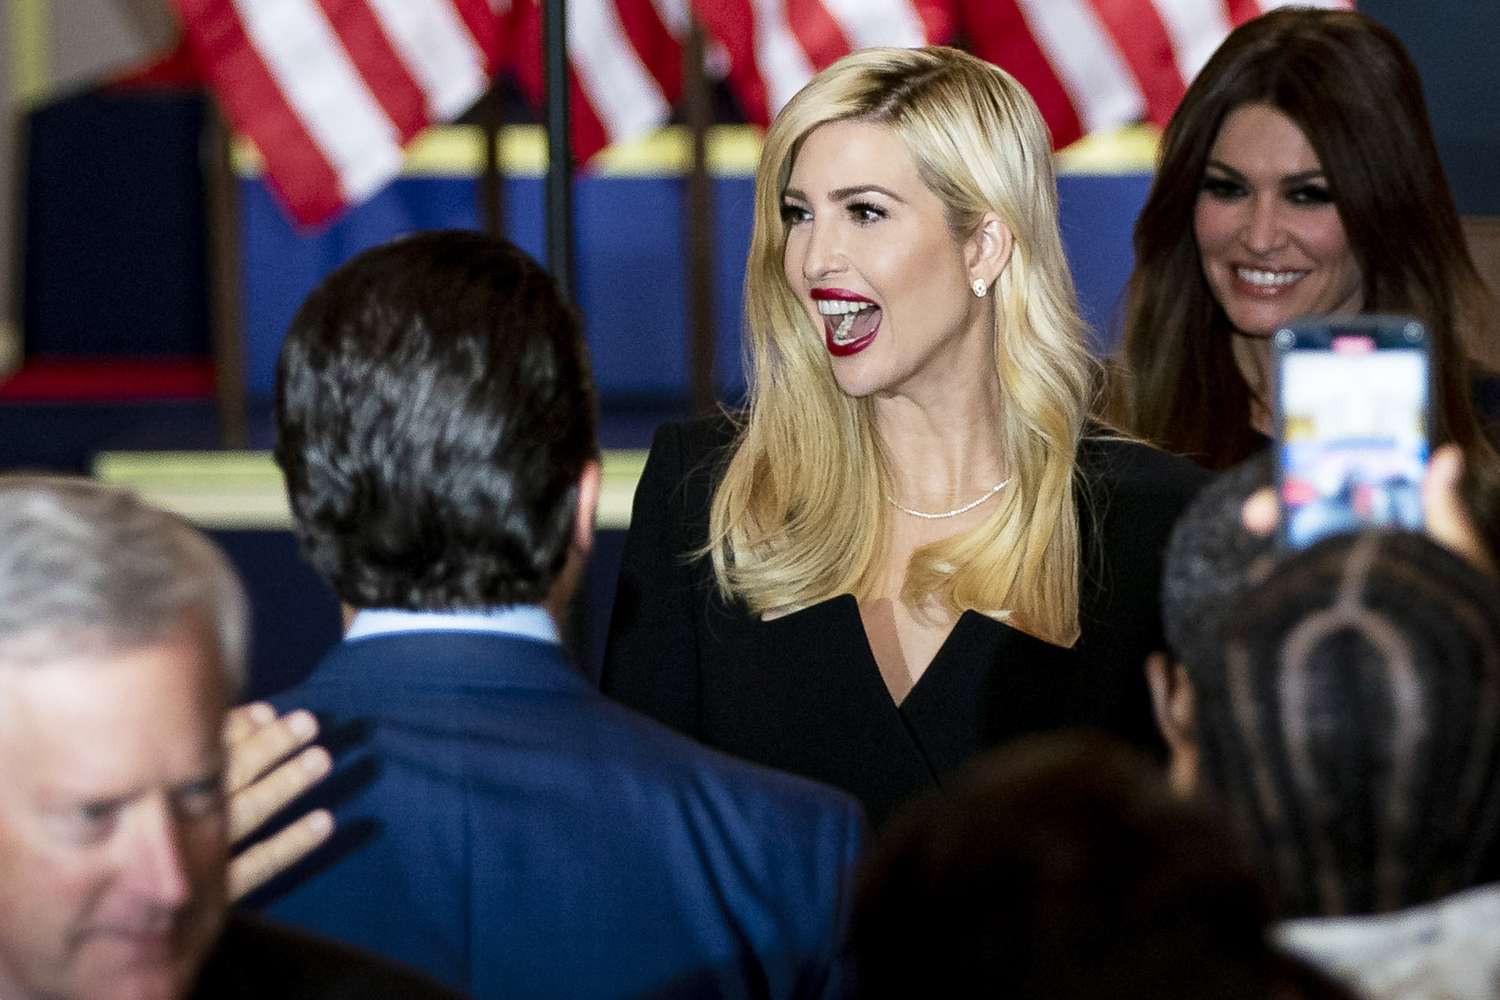 Ivanka Trump, assistant to U.S. President Donald Trump, attends an election night party in the East Room of the White House in Washington, D.C., U.S., on Wednesday, Nov. 4, 2020